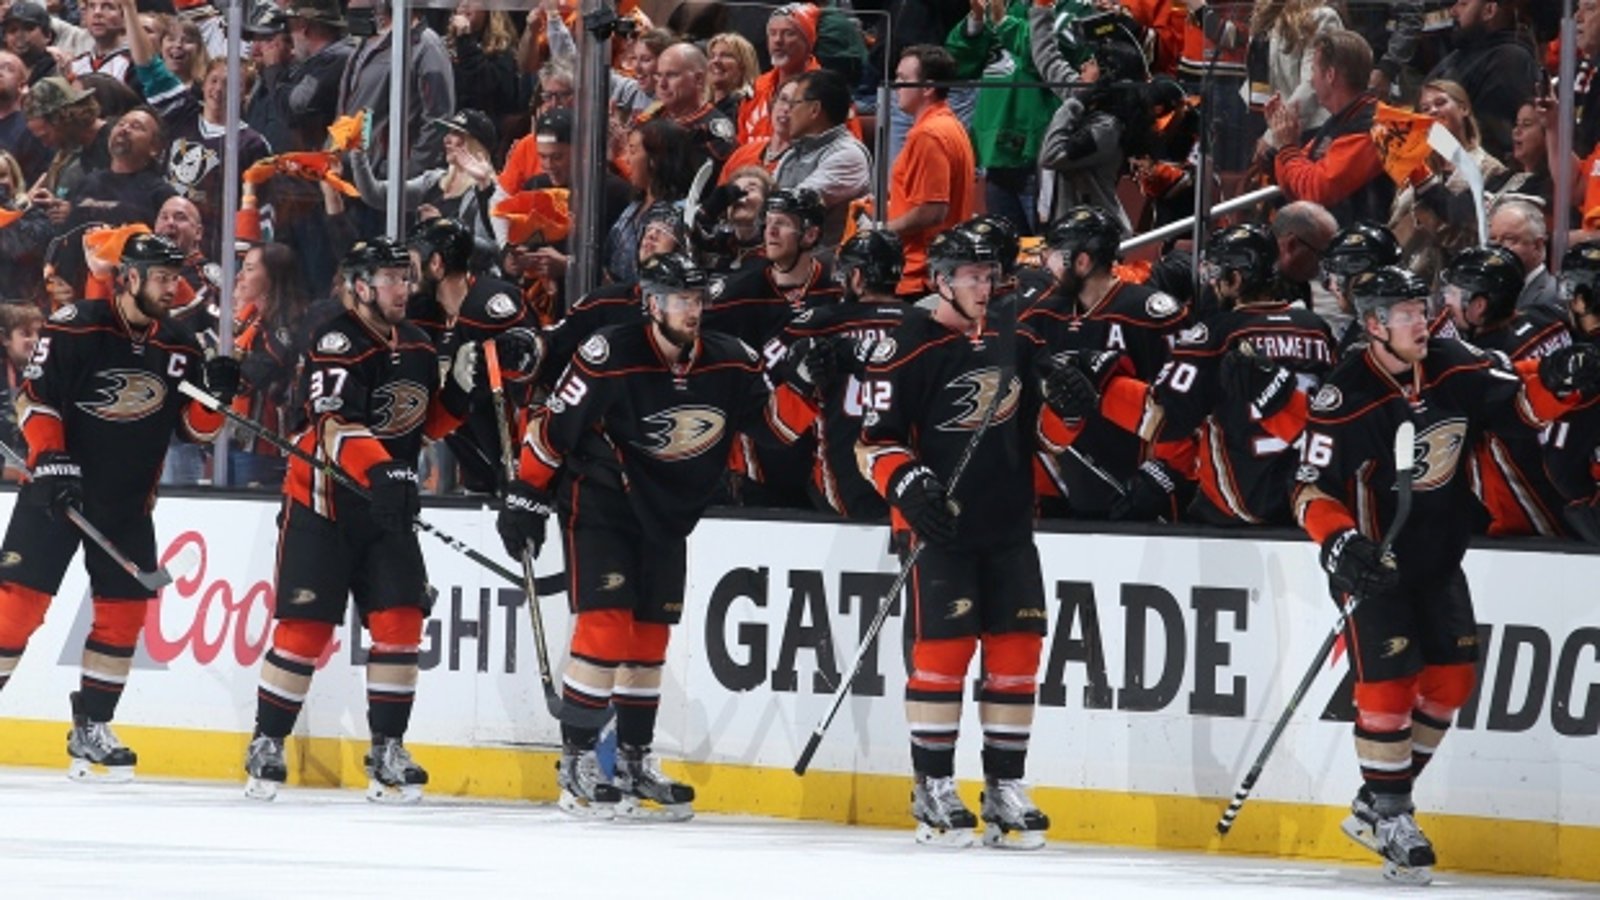 Report: Finally some good news for the Ducks!